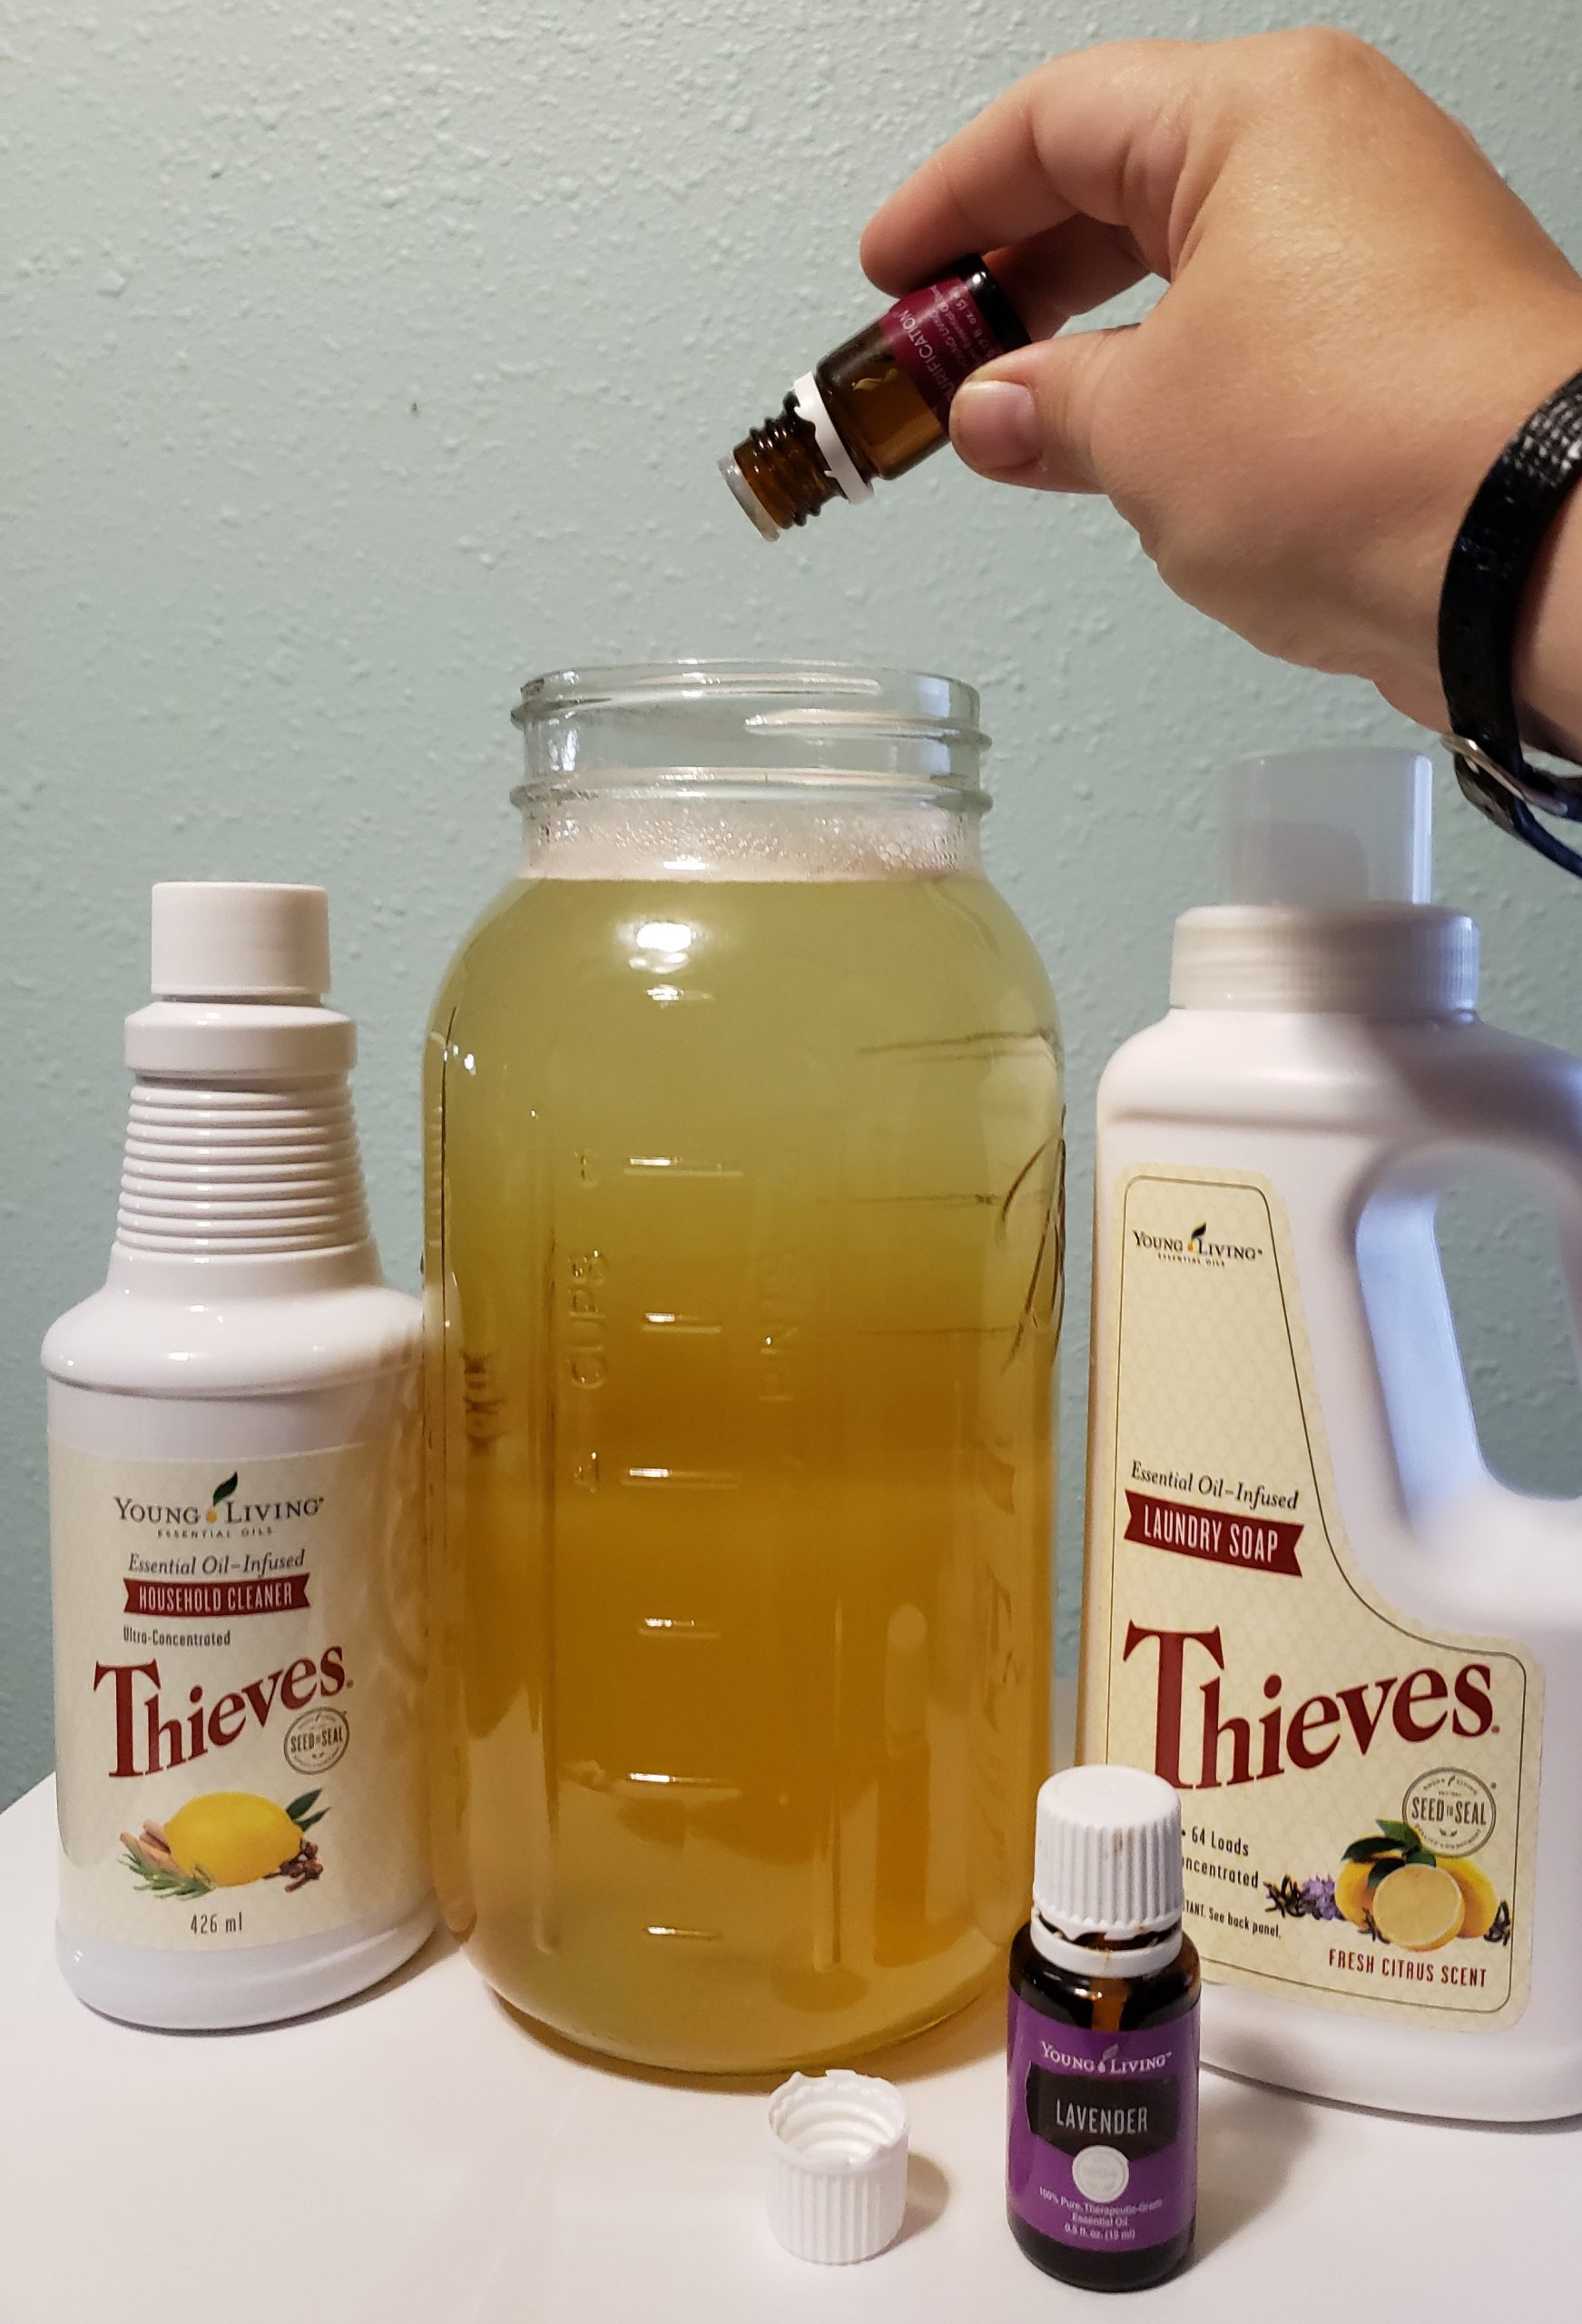 young living purification oil blend being carefully dripped into a large glass jar of amber colored fluid next to thieves household cleaner laundry soap lavender essential oil